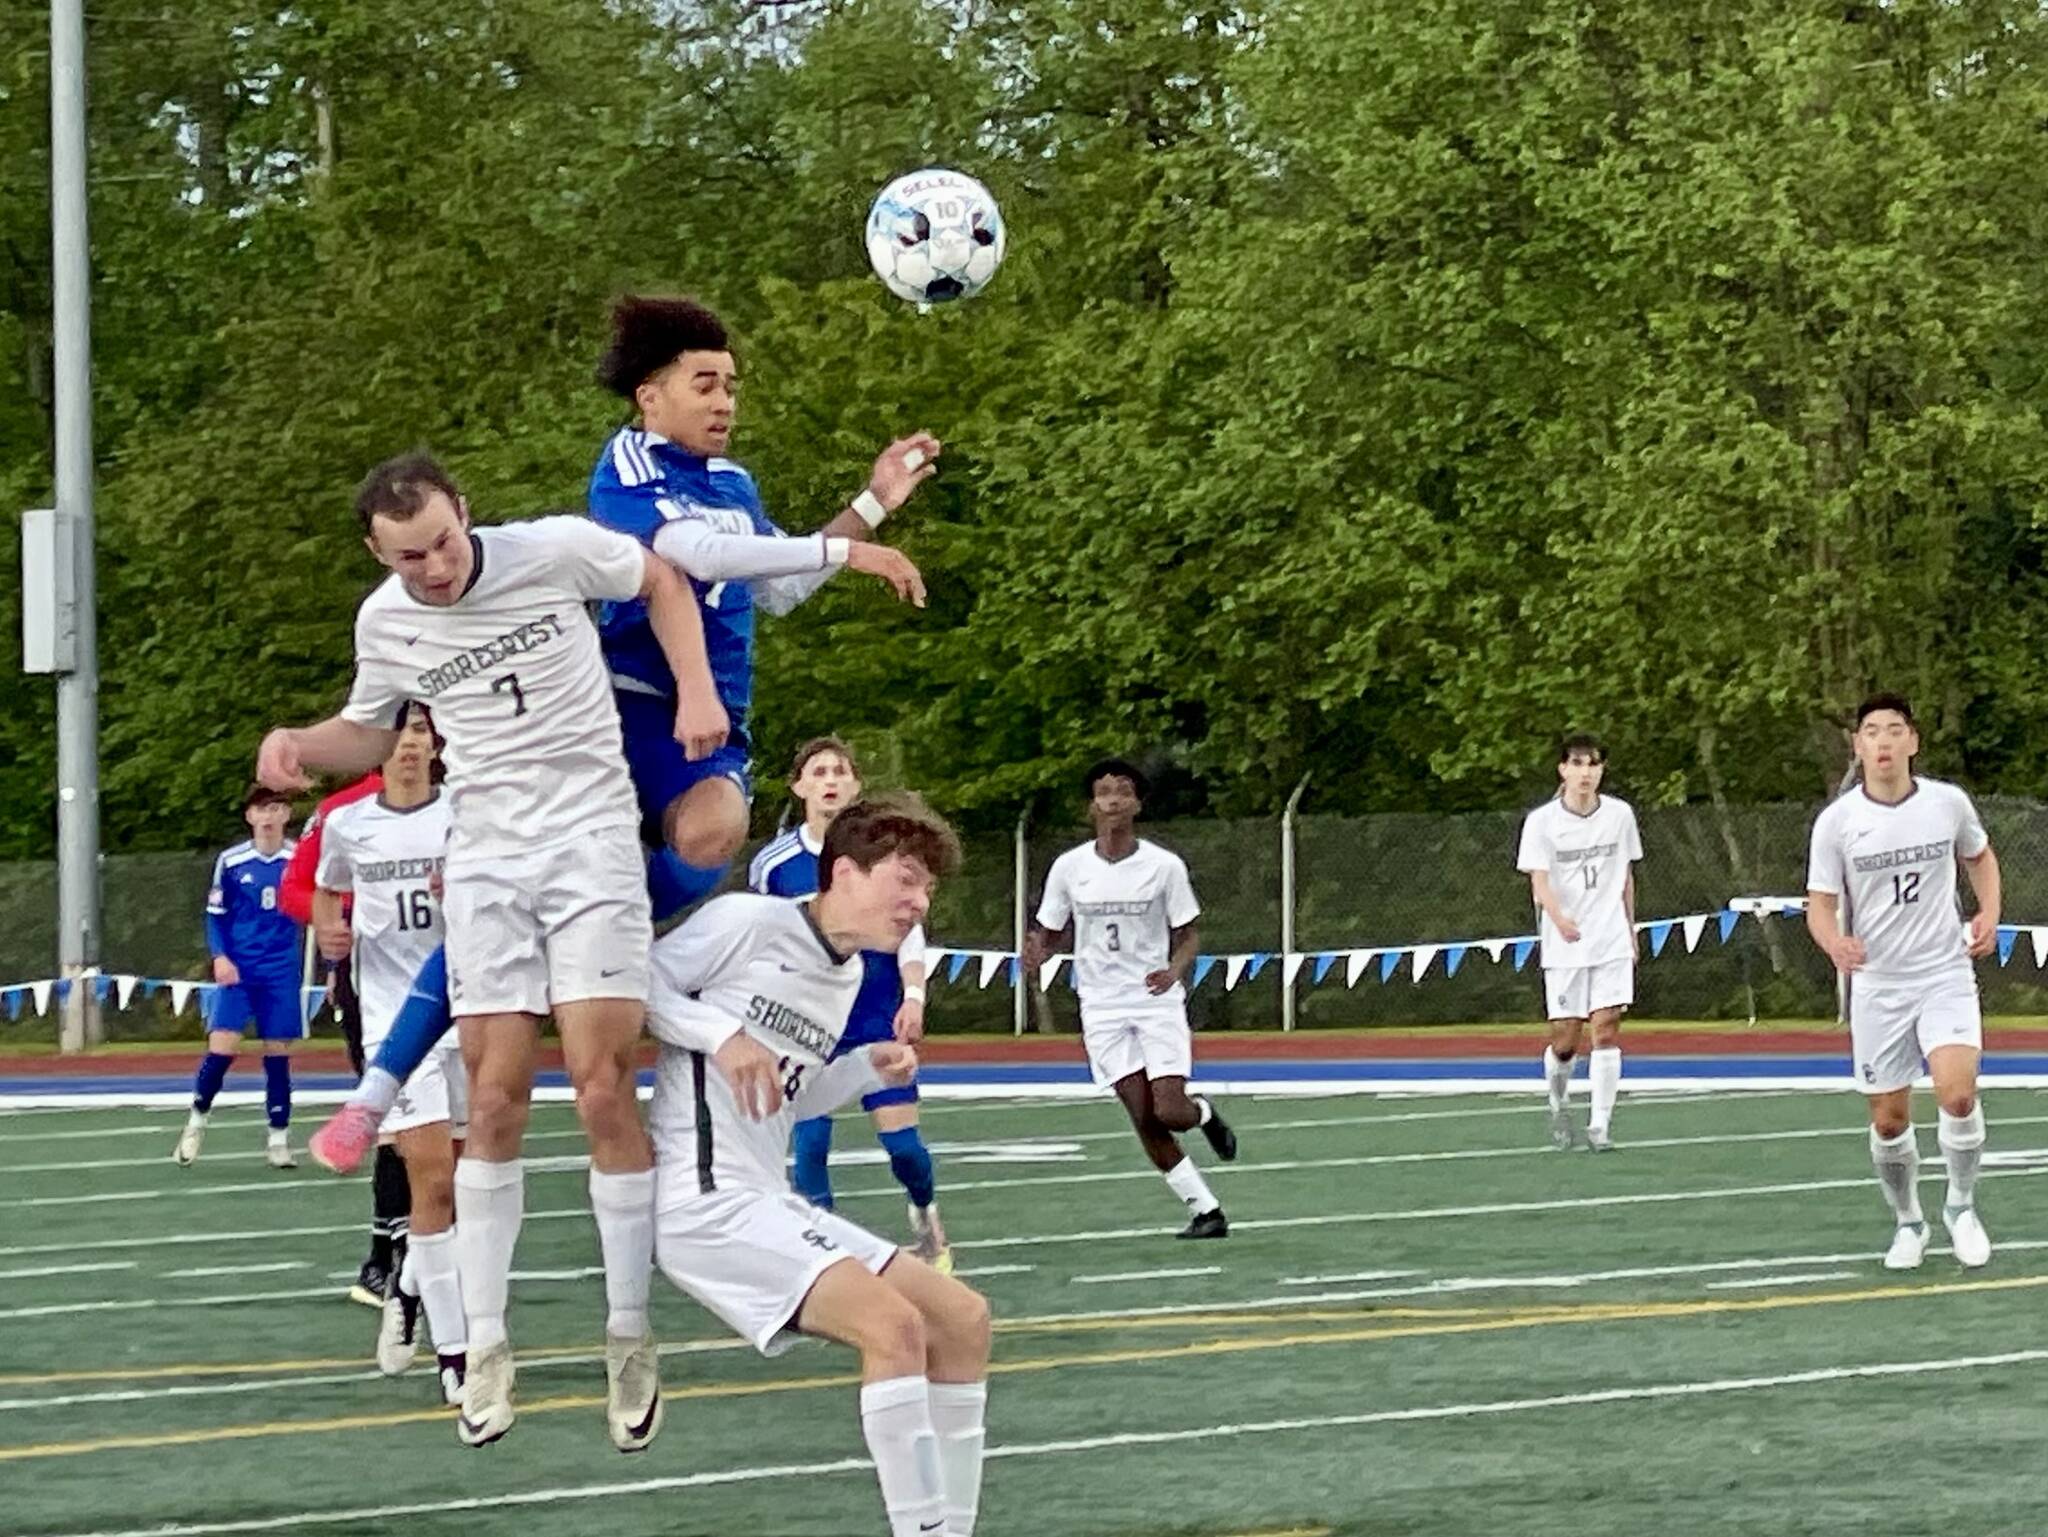 Shorewood’s Jackson Smith attempts a header shot over Shorecrest defenders Porter Lewis and Lachlan Wandler in Monday’s Wesco 3A/2A game at Shoreline Stadium. (Aaron Coe / The Herald)